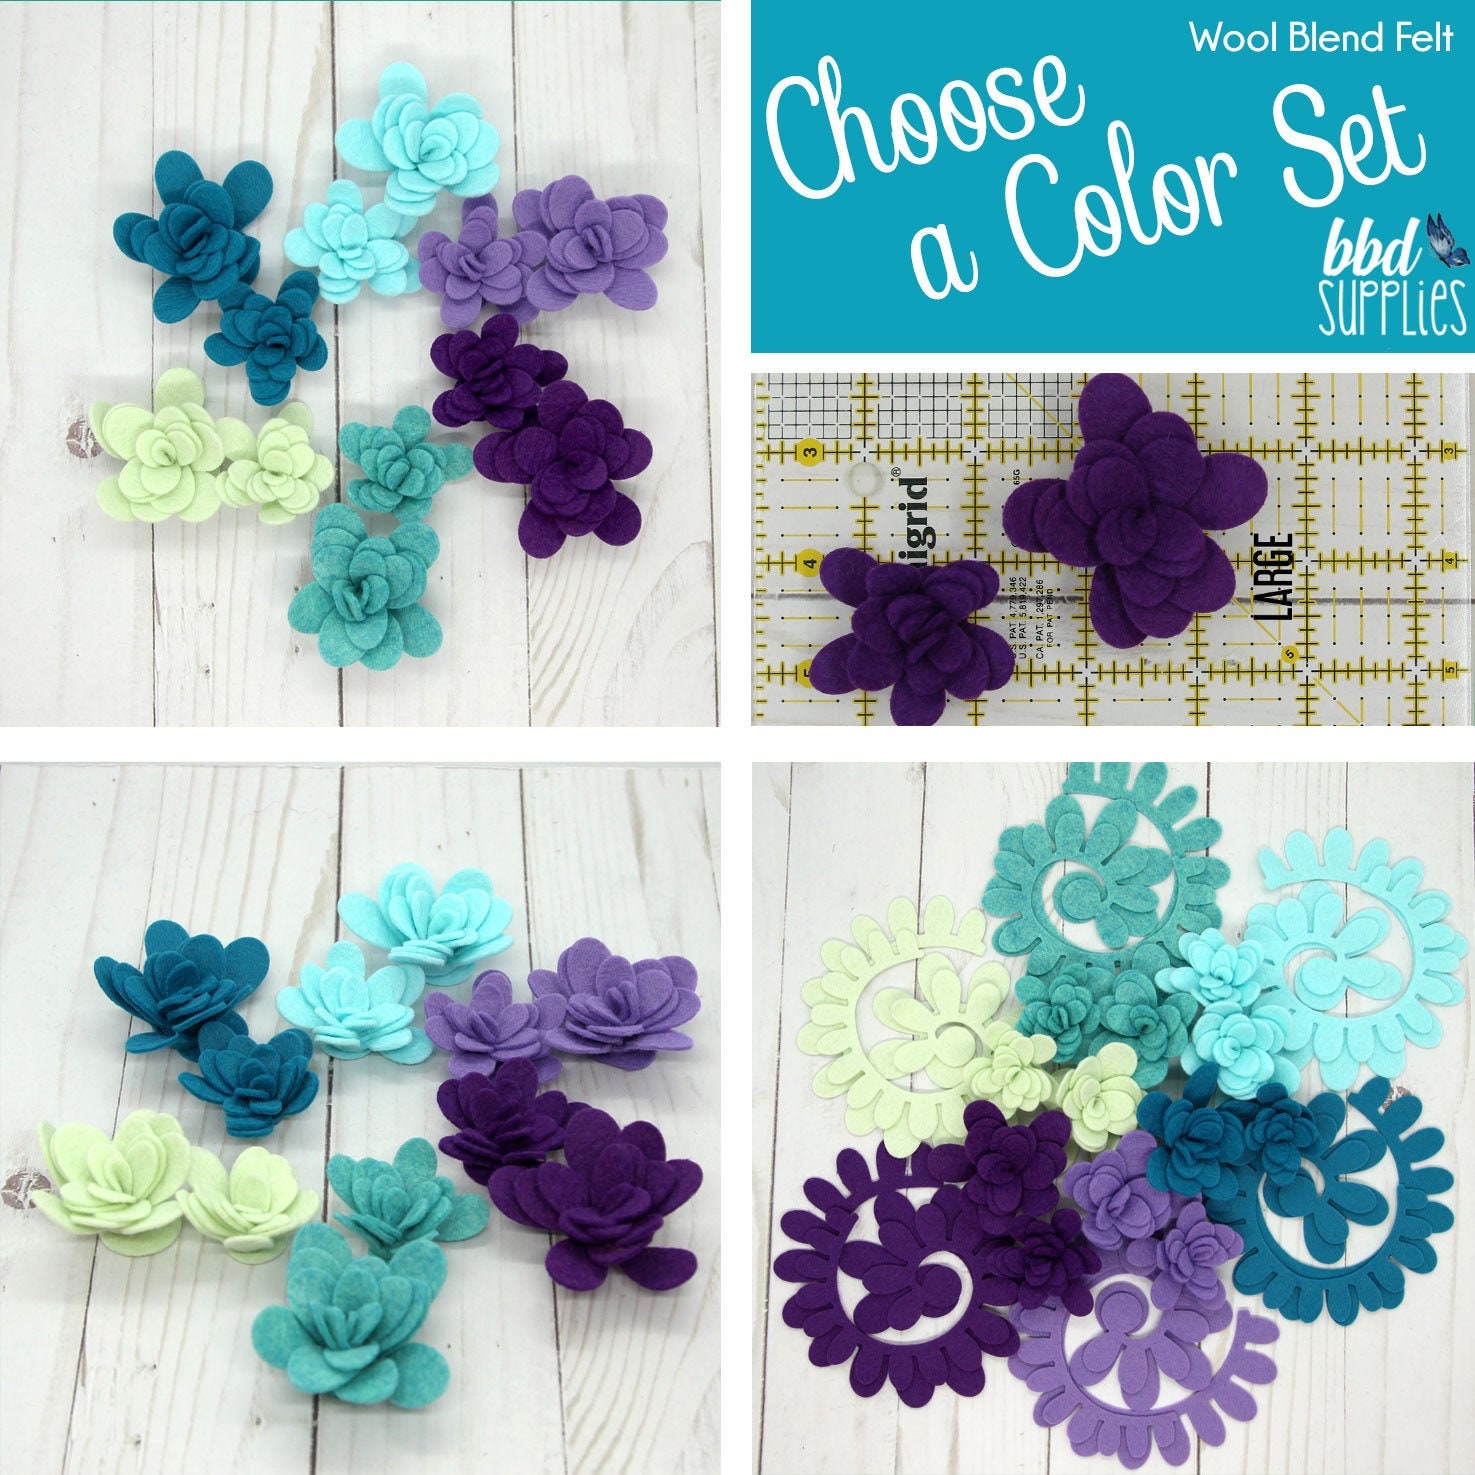 25 x SMALL WOOL BLEND FELT FLOWERS - CHOICE OF COLOURS/CRAFTS/APPLIQUE